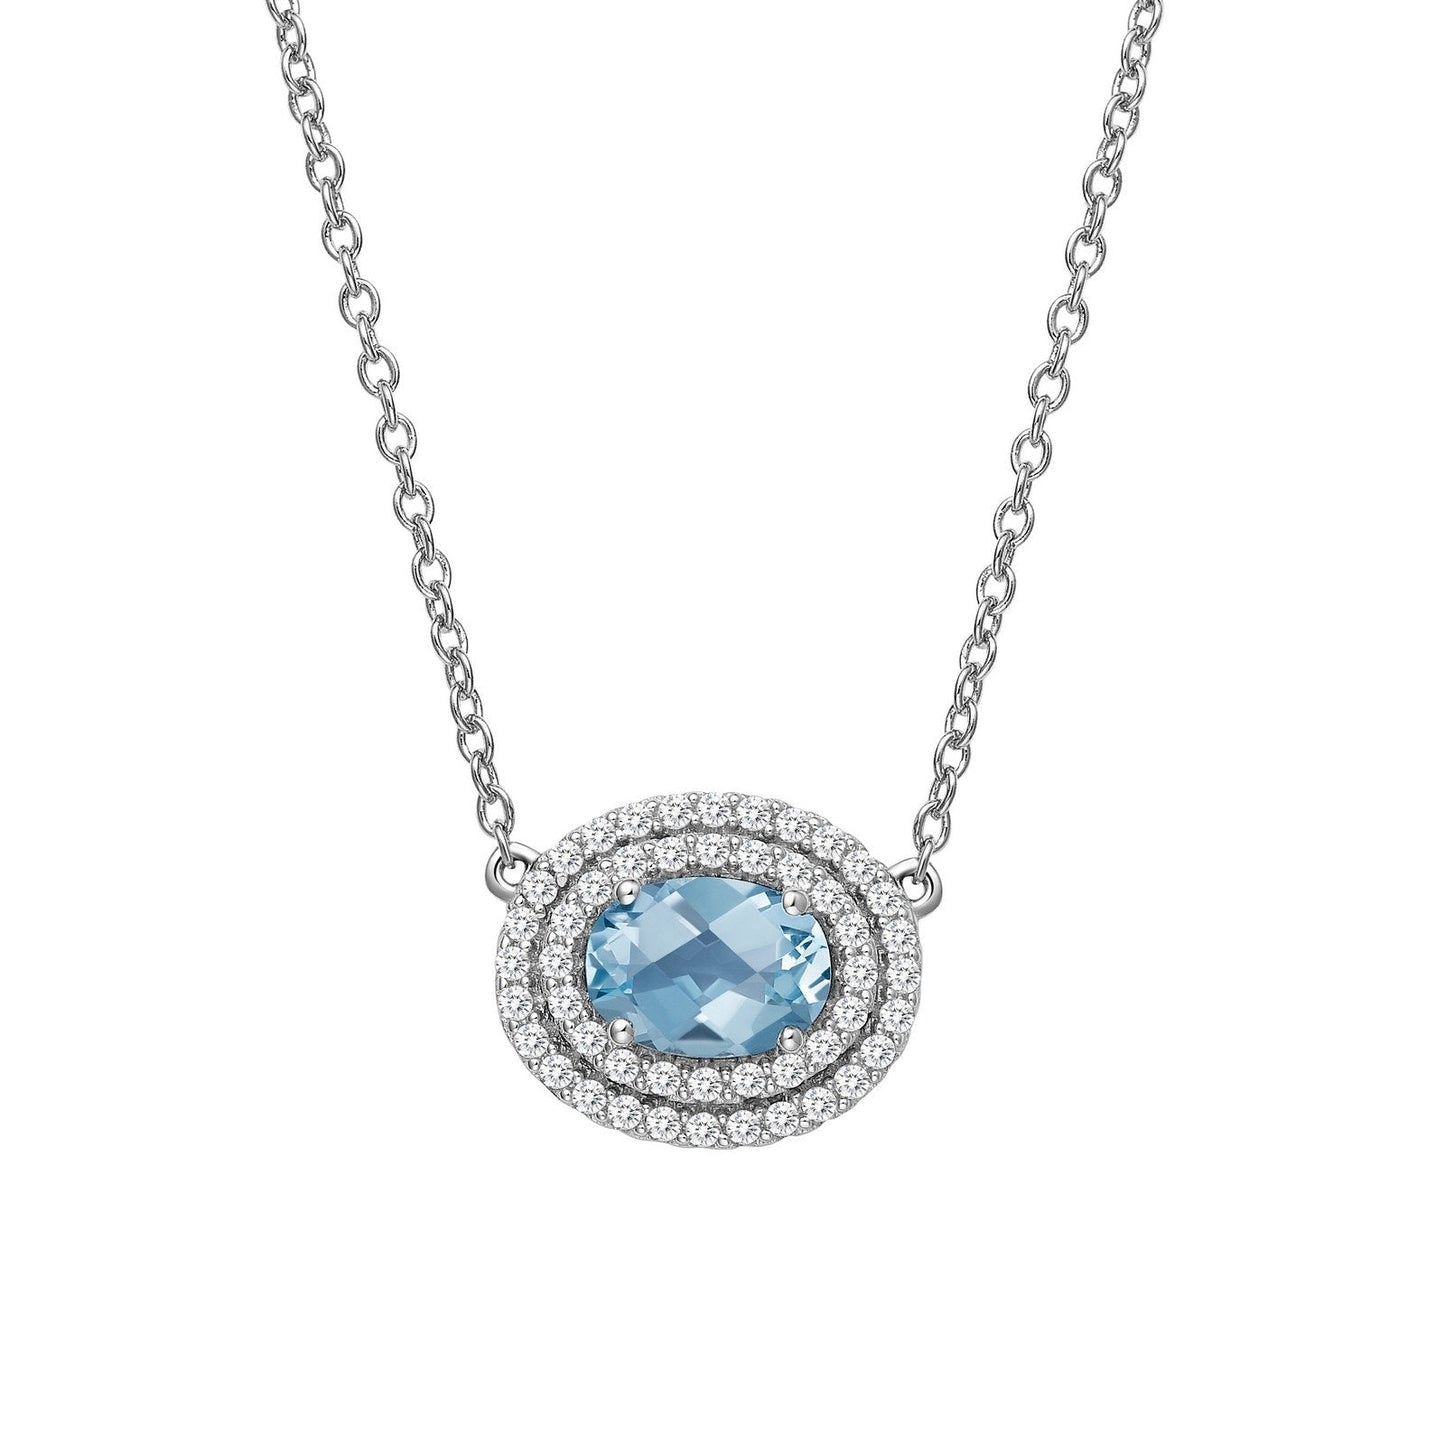 Load image into Gallery viewer, Lafonn Genuine Blue Topaz Halo Necklace Blue Topaz NECKLACES Platinum Appx CTW: 1.26 cts. Blue Topaz: Appx 0.76 cts.  Lassaire simulated diamonds: 0.50 cts. CTS 
